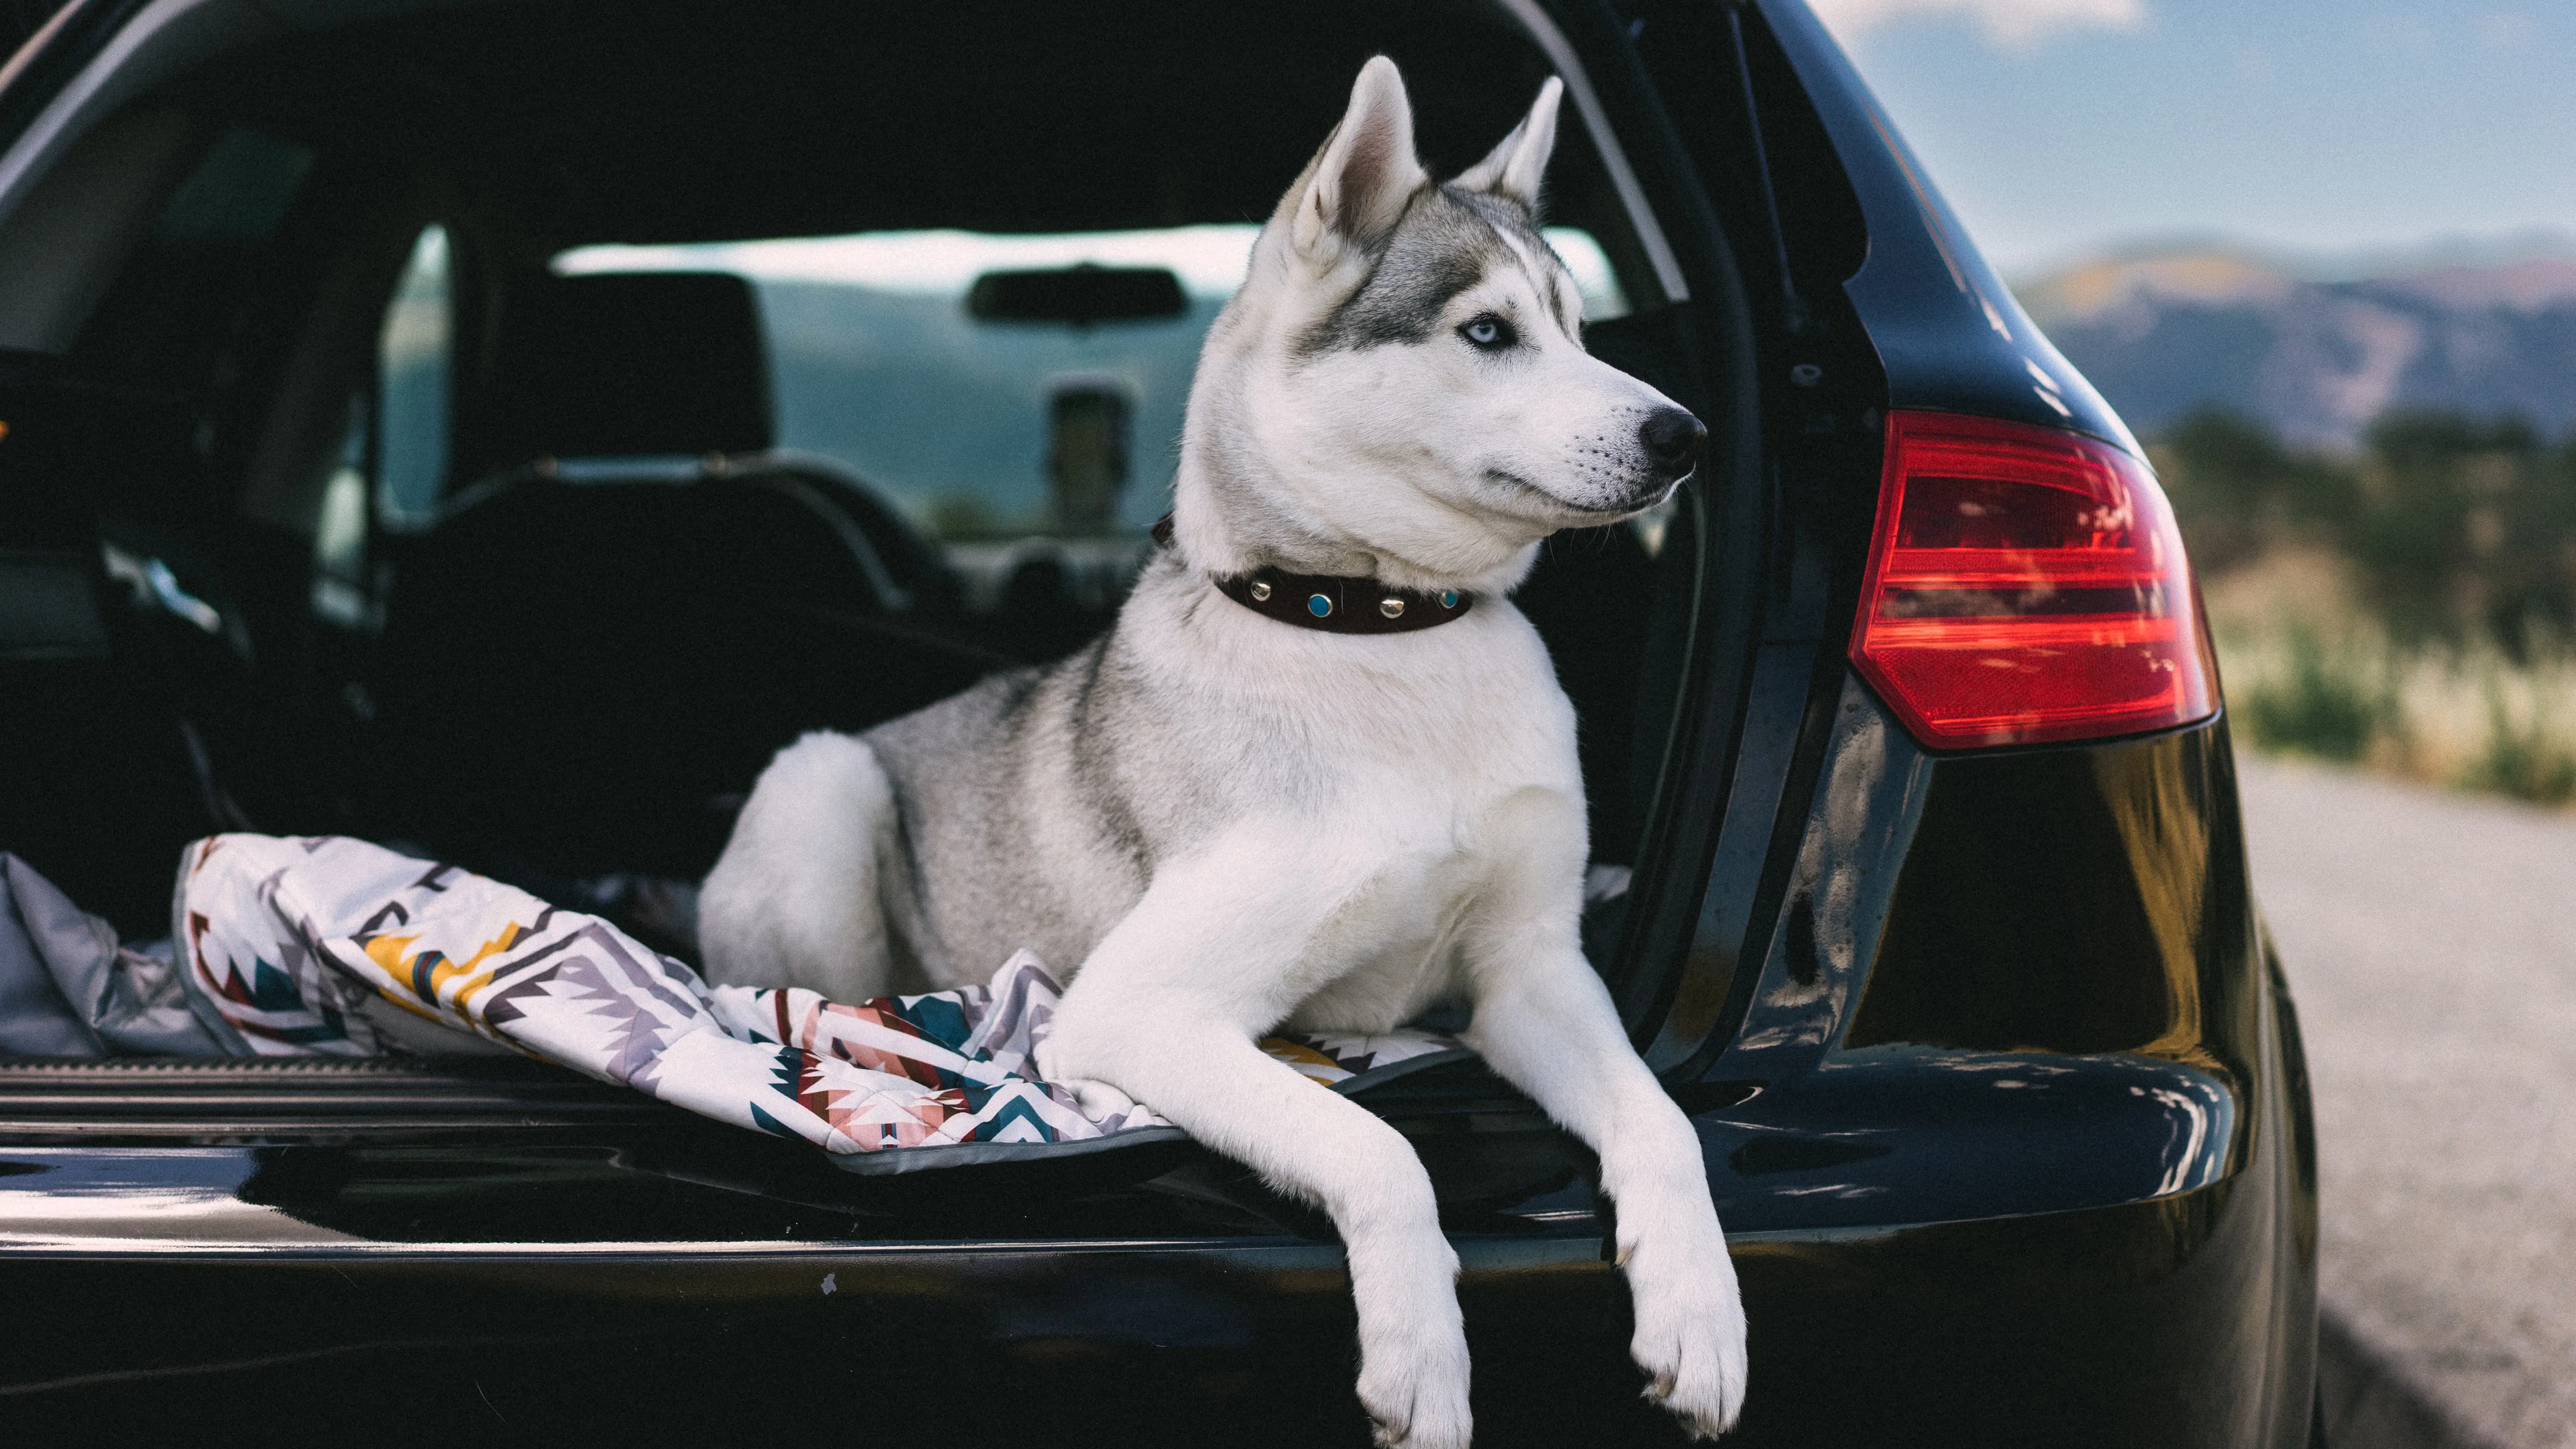 Pet safety in cars is often neglected, ponders this white dog sitting in a car boot that's thinking about road safety and pets